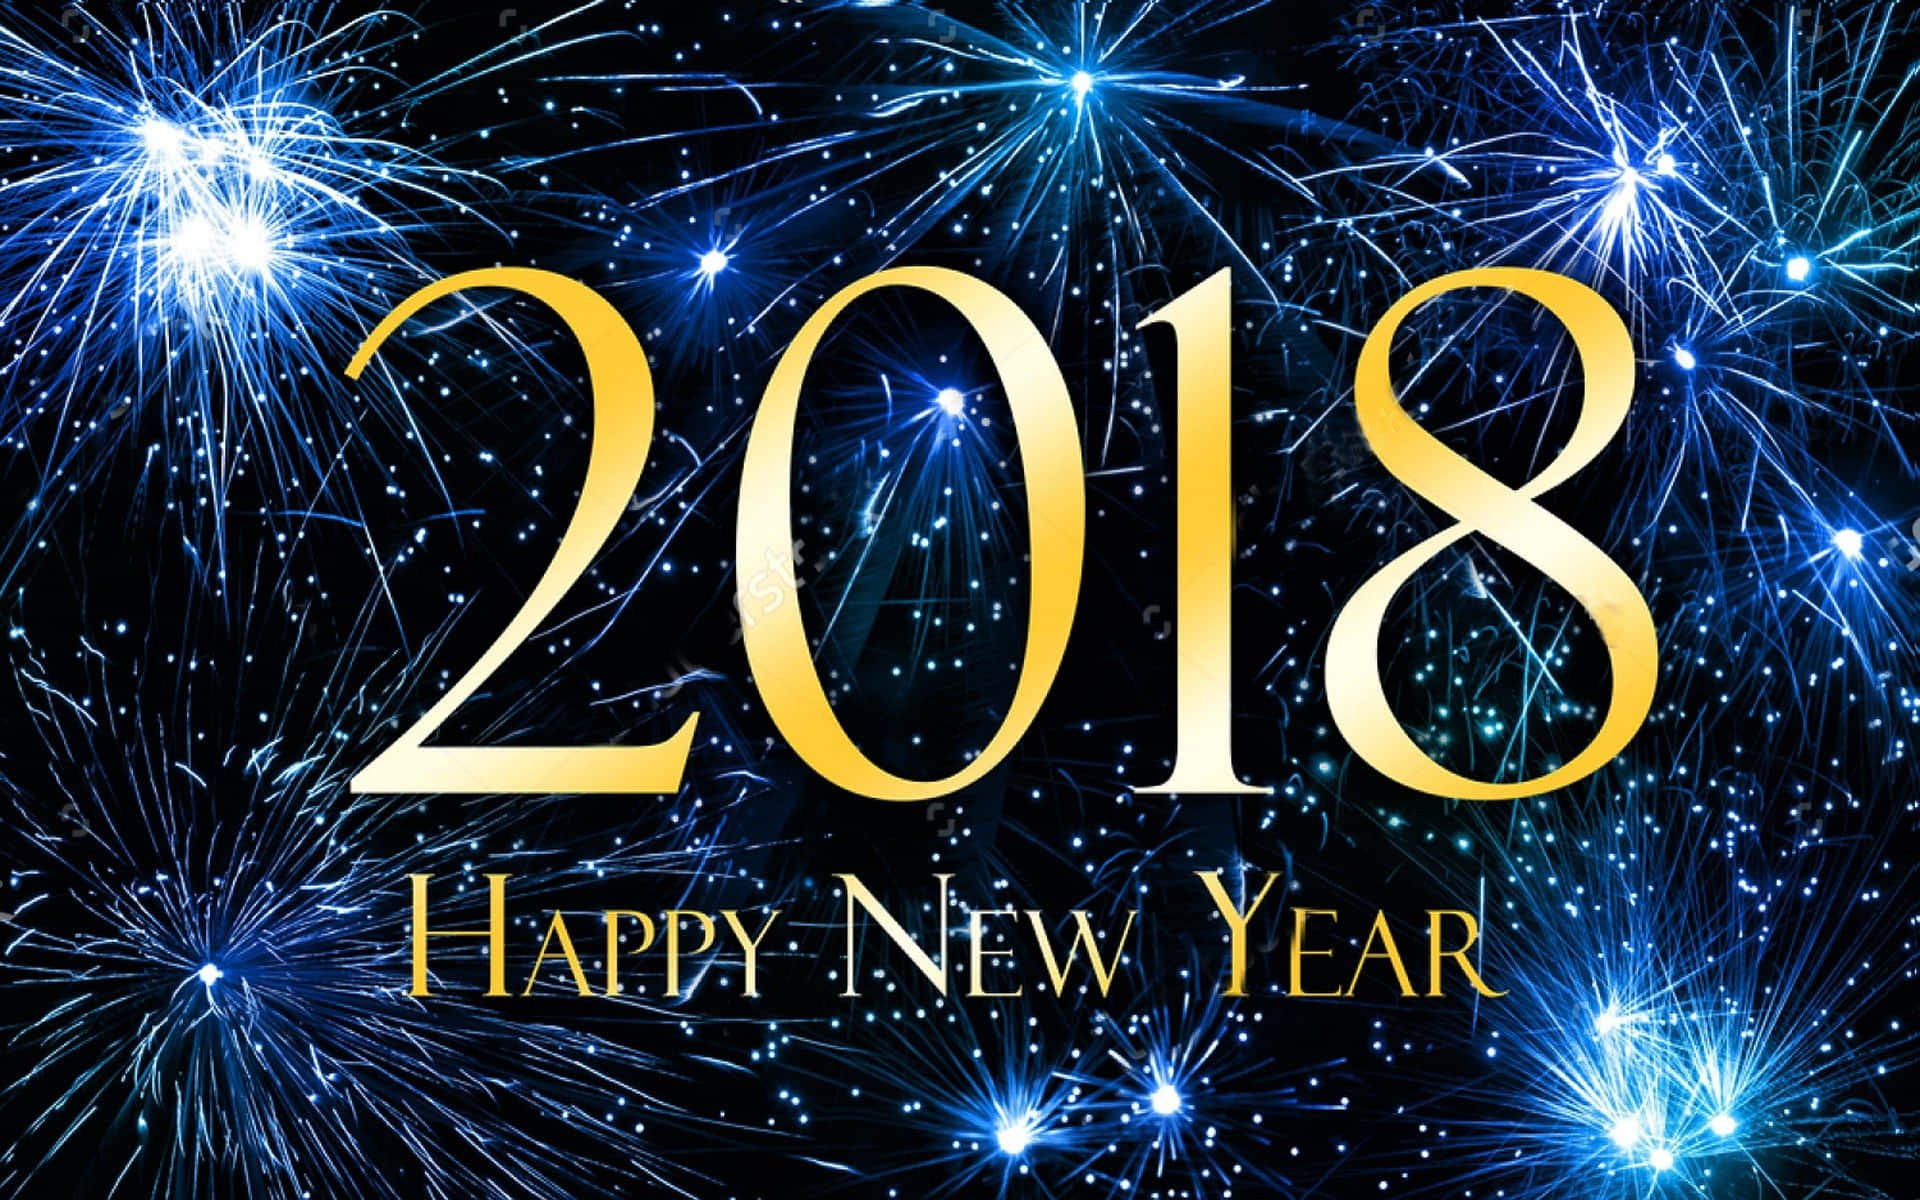 Happy New Year 2018 With Fireworks Wallpaper